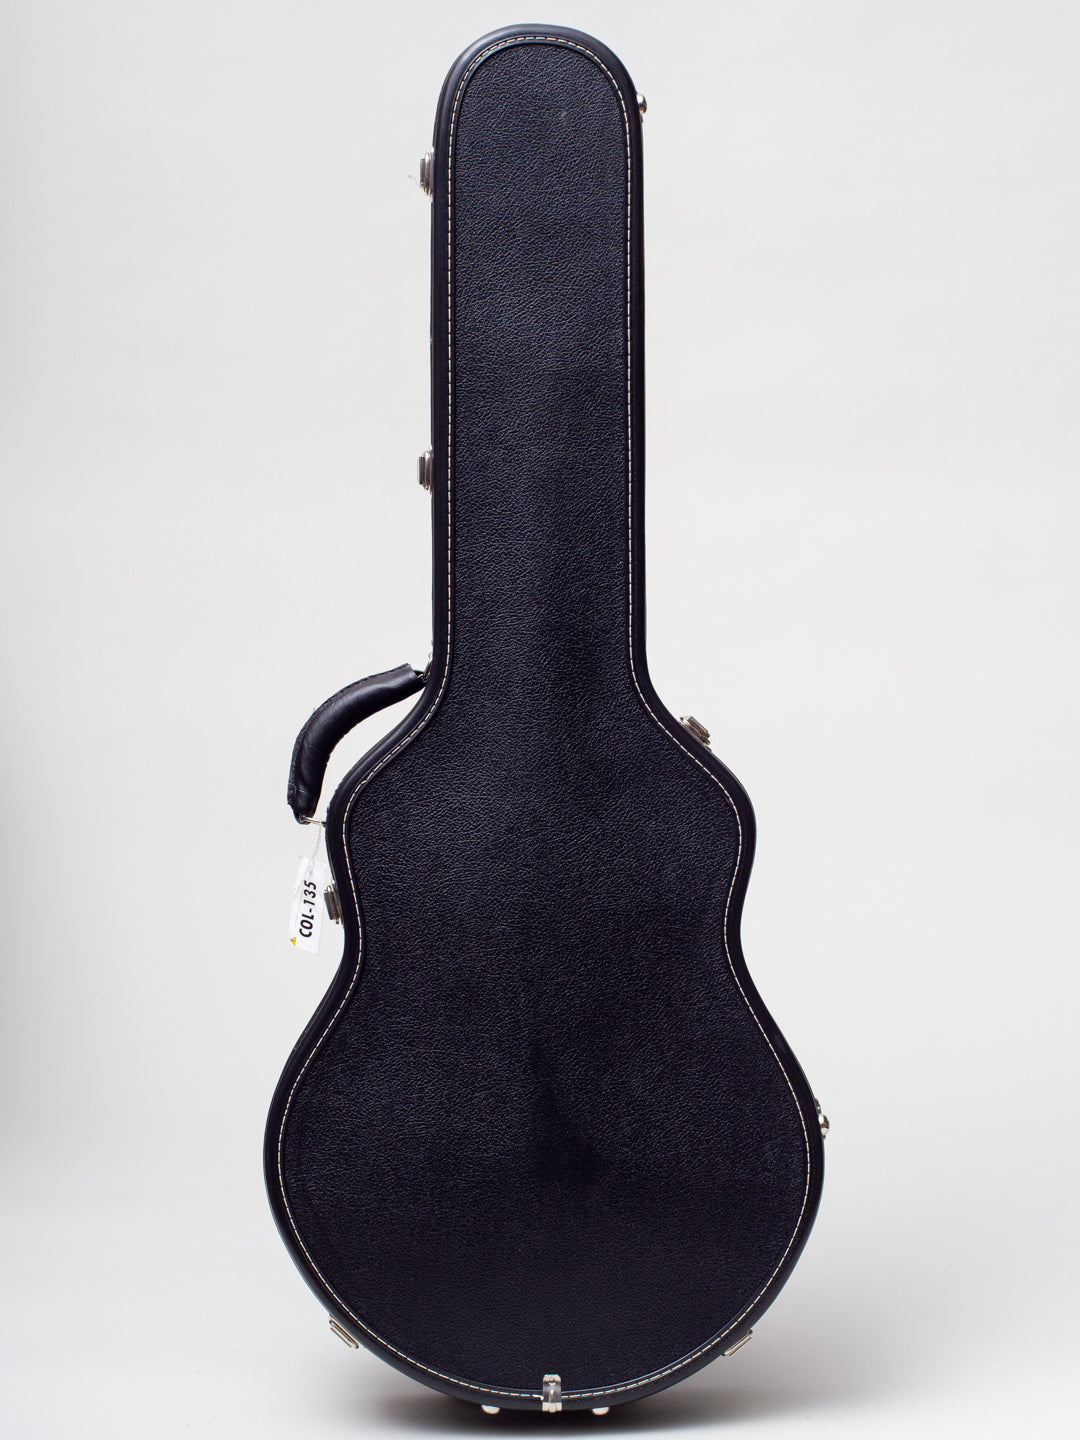 Collings I-35 LC Aged Black SN: 221877